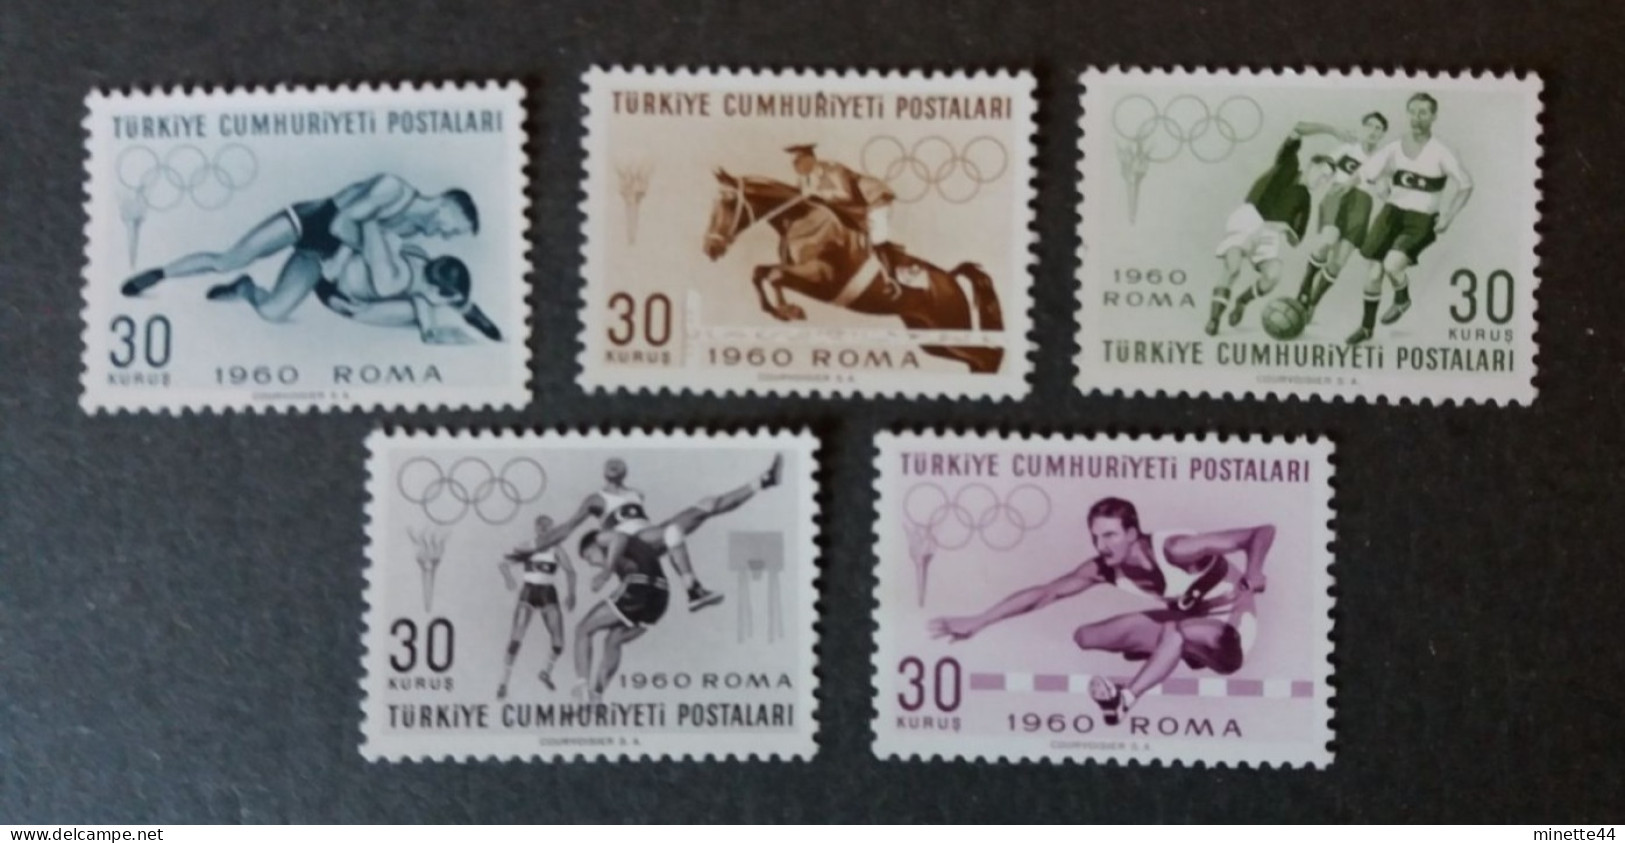 TURQUIE TURKEY 1960 MNH**  GAMES JEUX LUTTE JUMPING ATHLETISME  BASKET FOOTBALL SPORTS - Zomer 1960: Rome